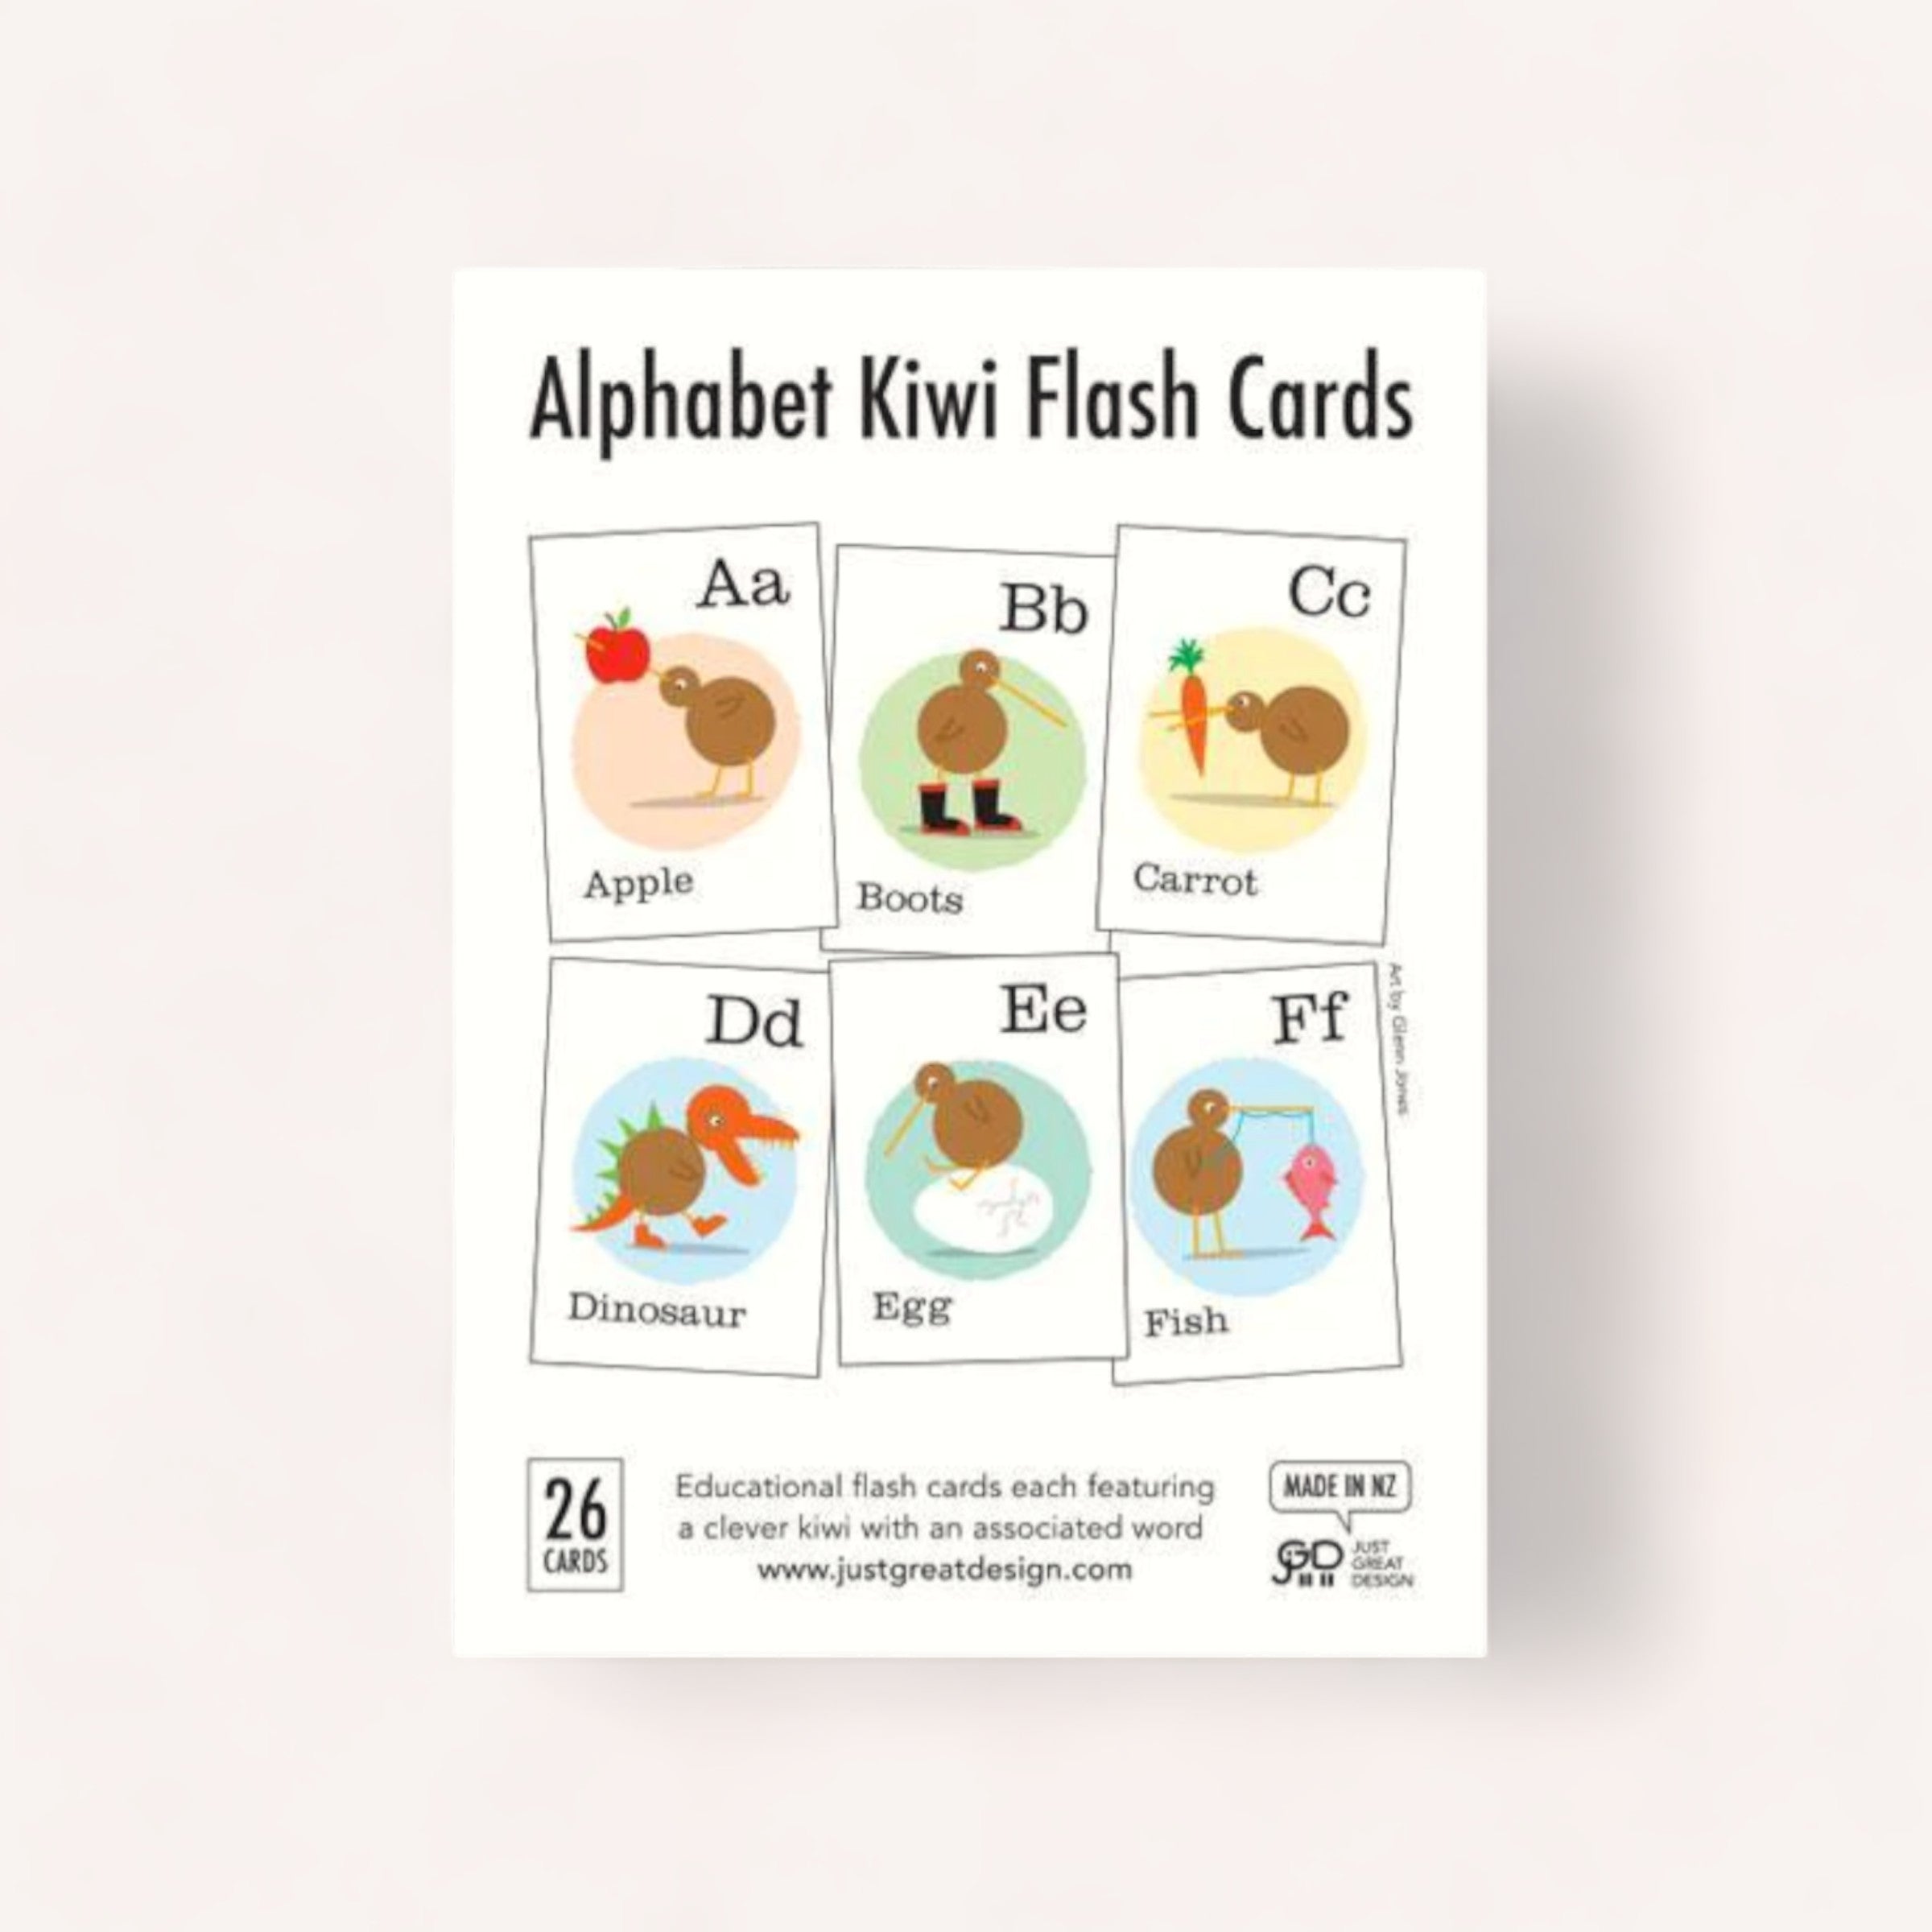 ABC Flash Cards featuring Glenn Jones Accessories with adorable Kiwi character illustrations, showcasing letters a to f with corresponding words: apple, boots, carrot, dinosaur, egg, and fish.